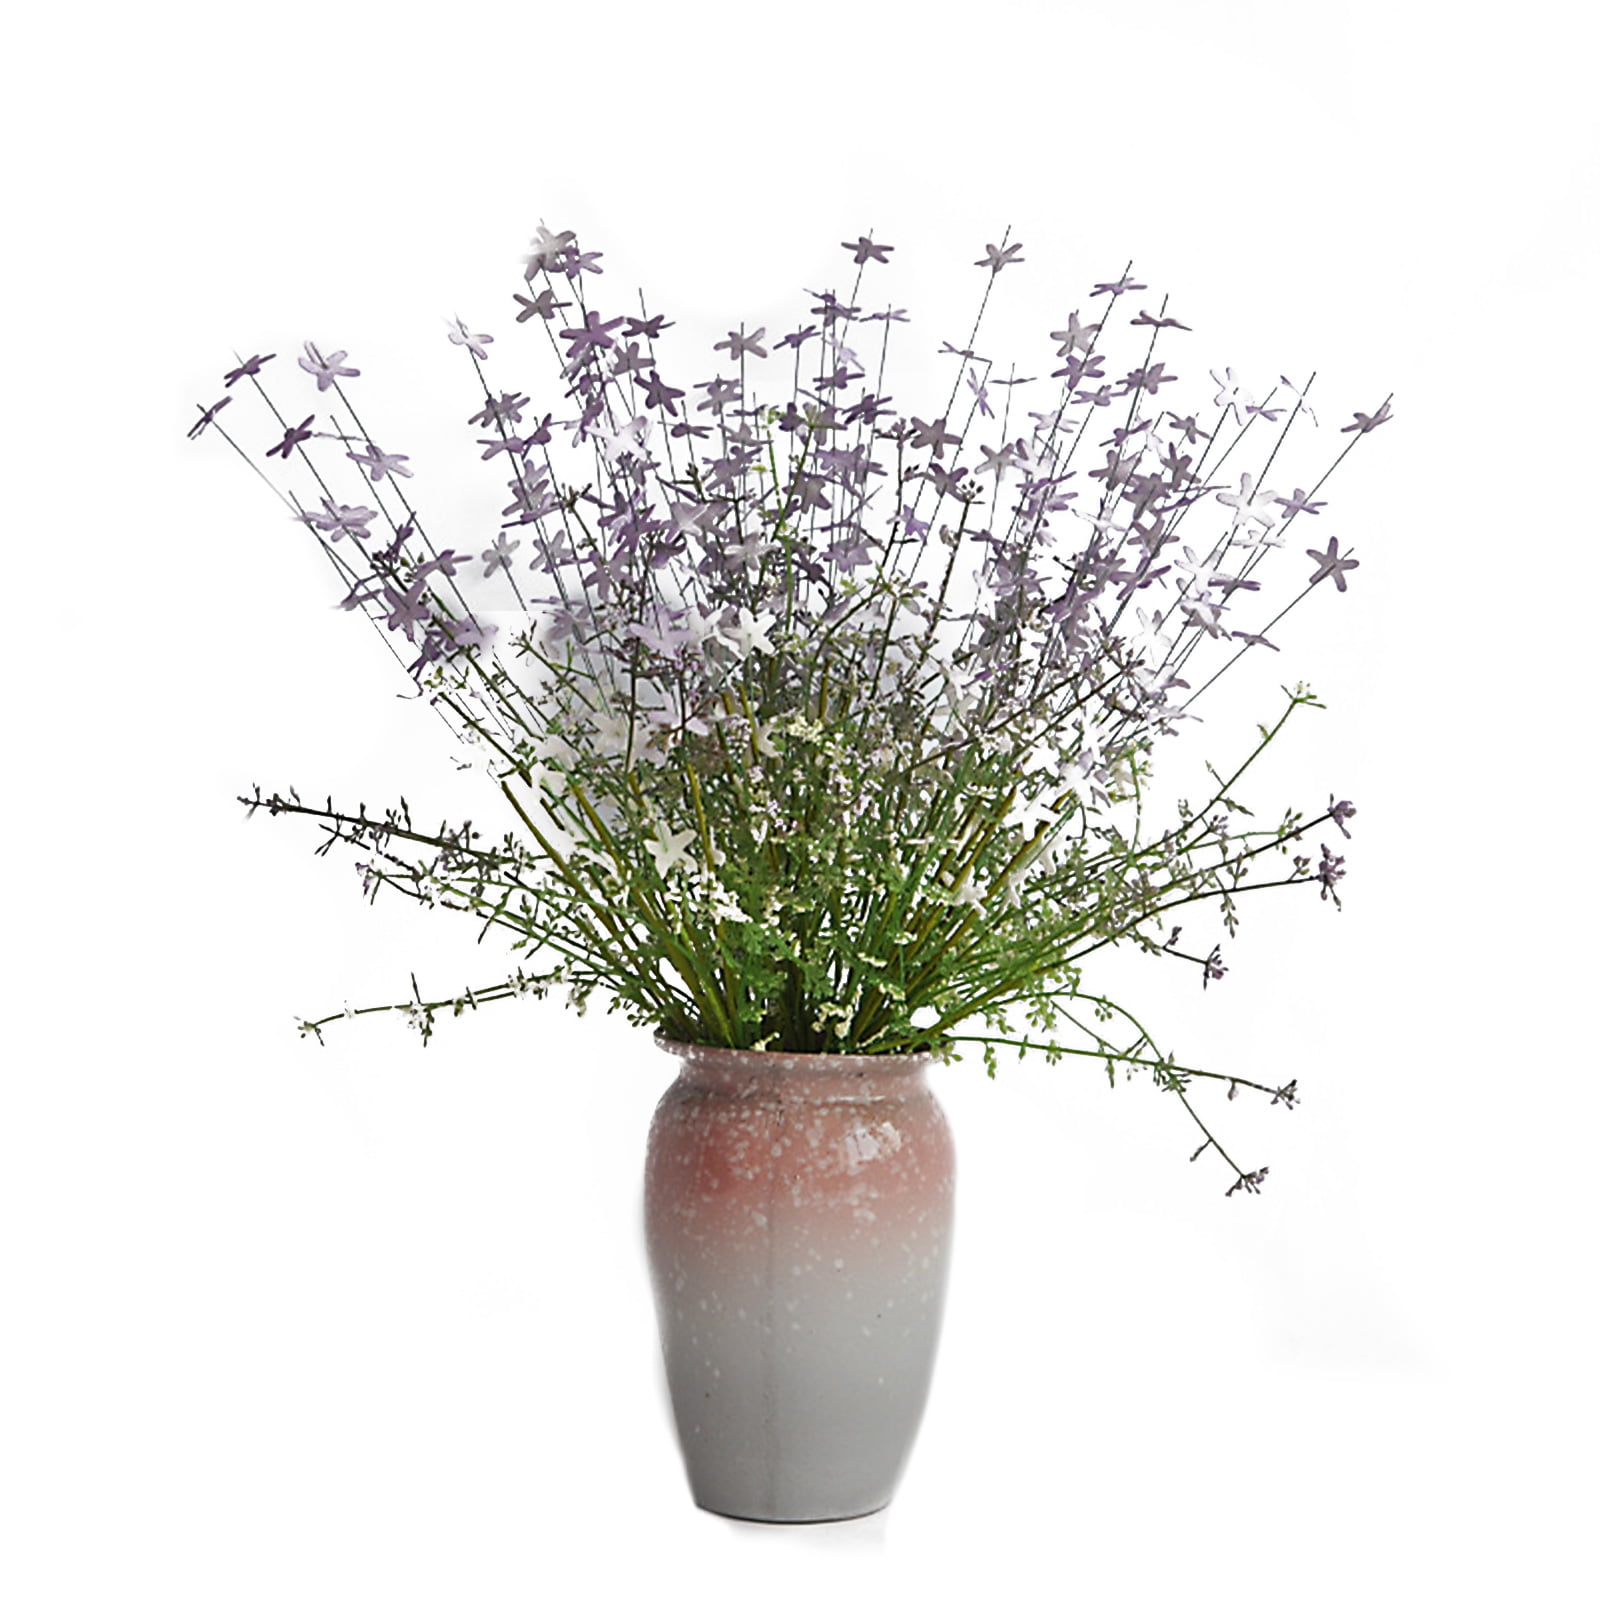 New Faux Grass In pot Decorative Artificial Spring Flowers 50cm